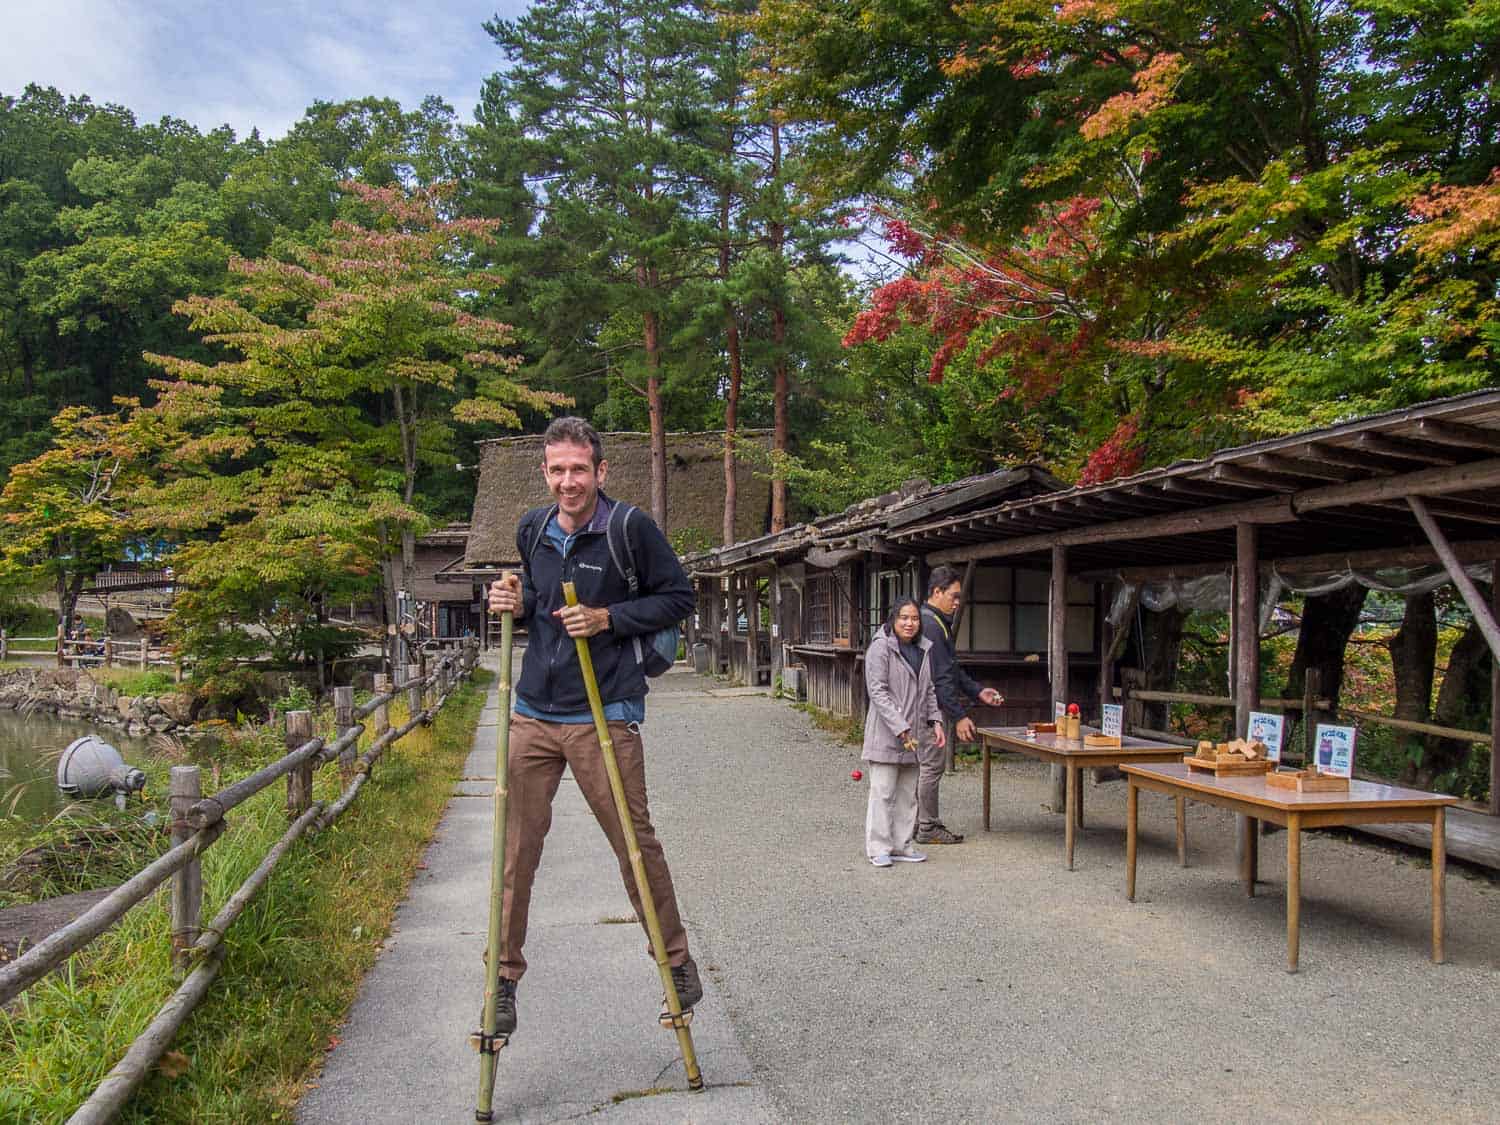 Bluffworks pants review - wearing the best travel pants on stilts on Takayama, Japan